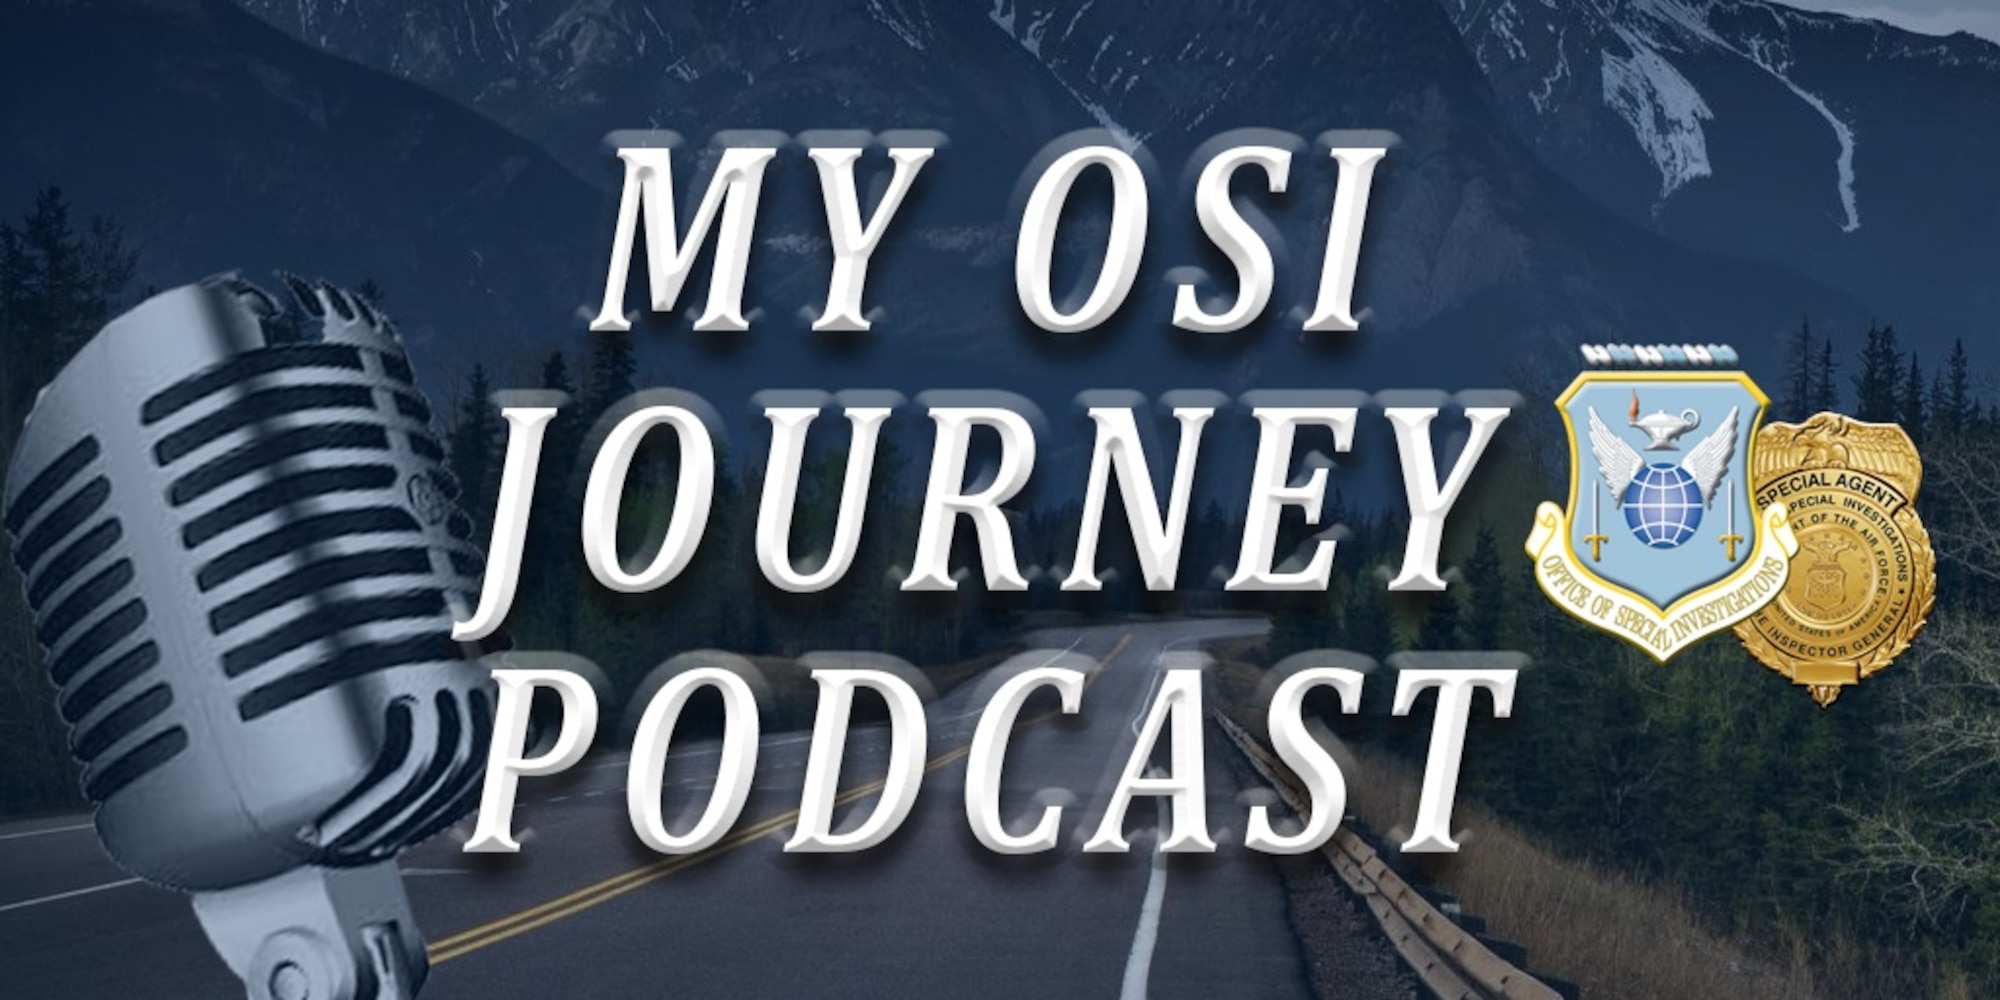 The My OSI Journey podcast is a special edition of OSI Today, showcasing the Diversity and Inclusion of it's command-wide members. (Graphic by Mr. Al Tubbs, OSI/PA)